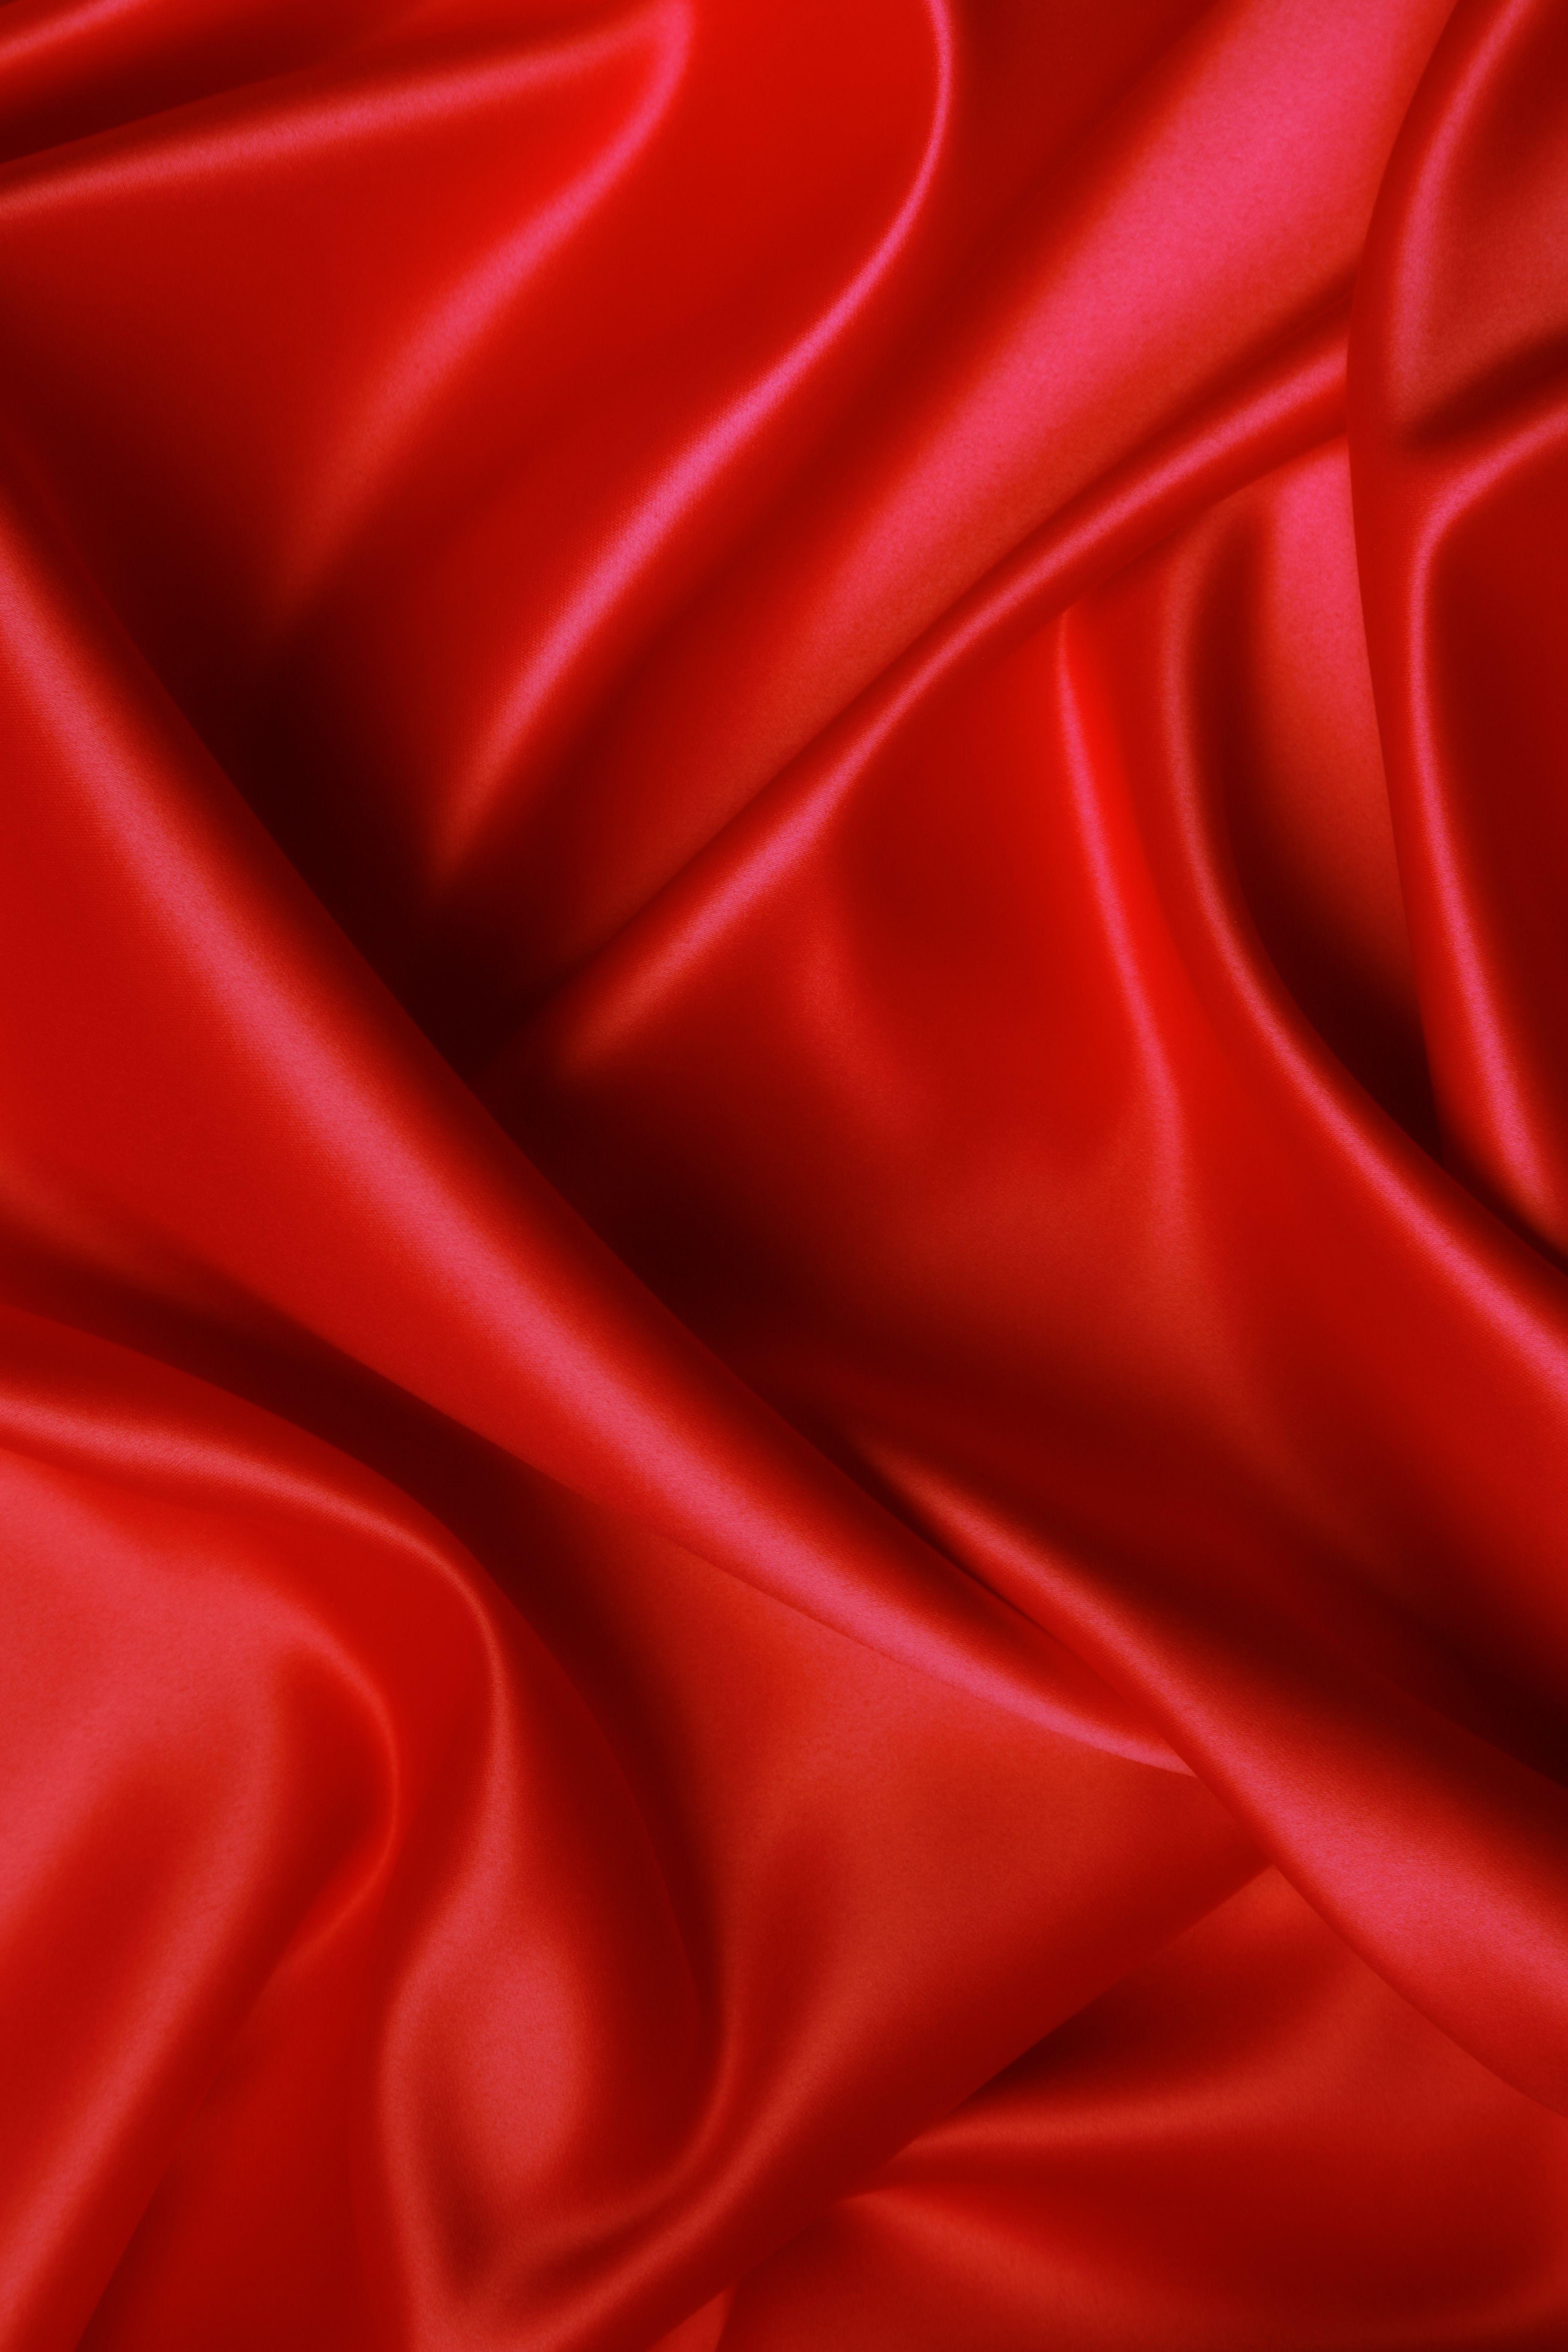 Moodles RED. Red Aesthetic, Red Fabric, Red Satin